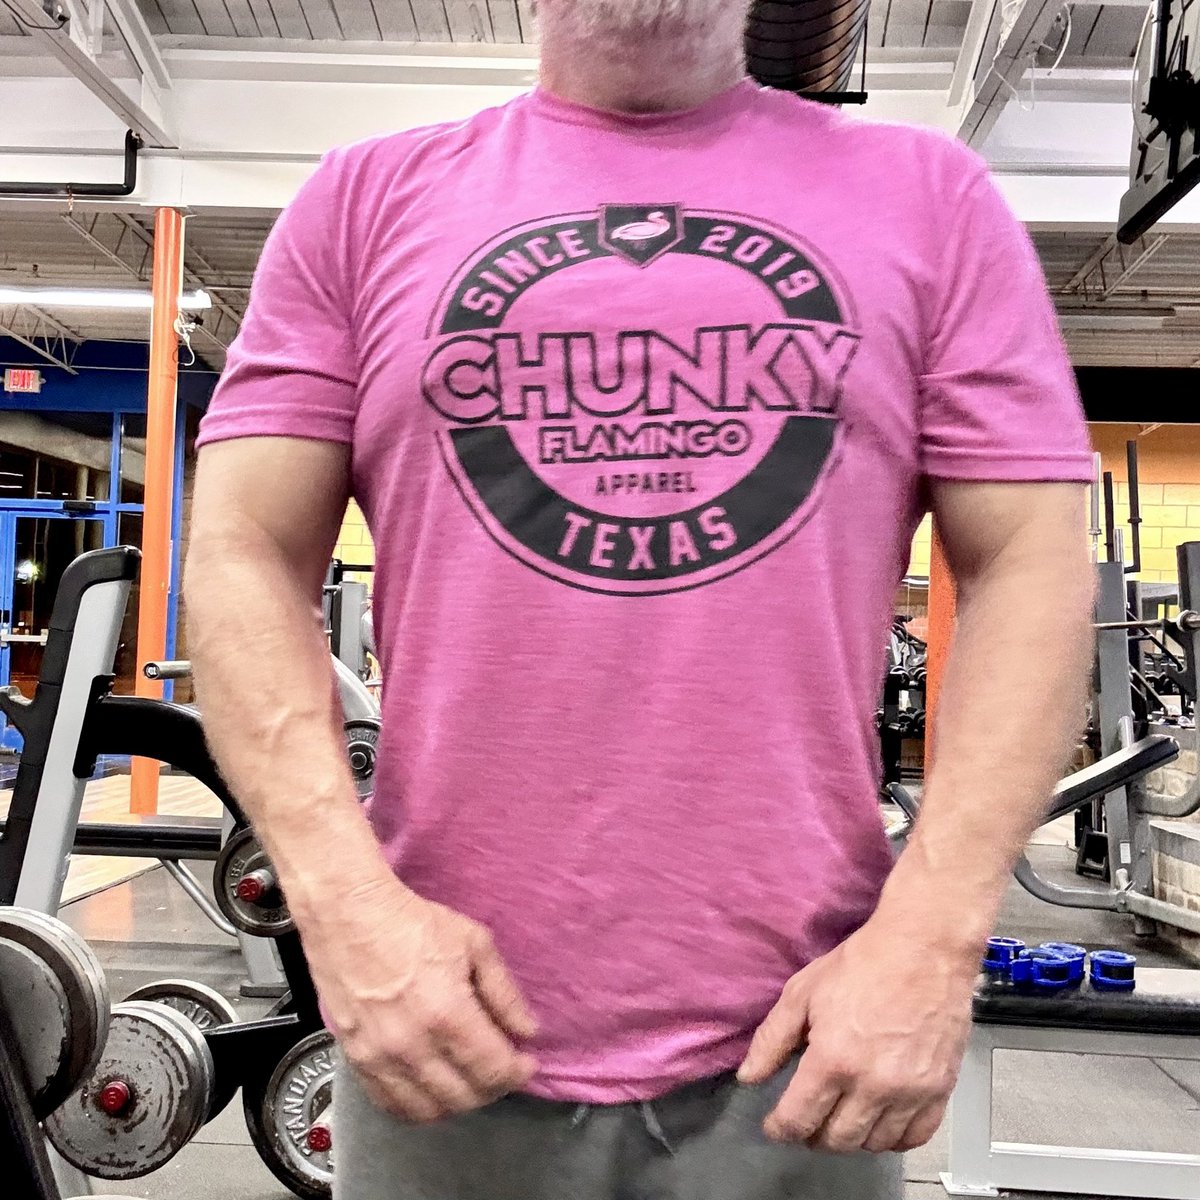 It’s Tuesday after a long weekend…. Let’s get back in the grind and #RockTheMingo while we’re at it. You too can be one of my amazing models aka customers! ChunkyFlamingo.com